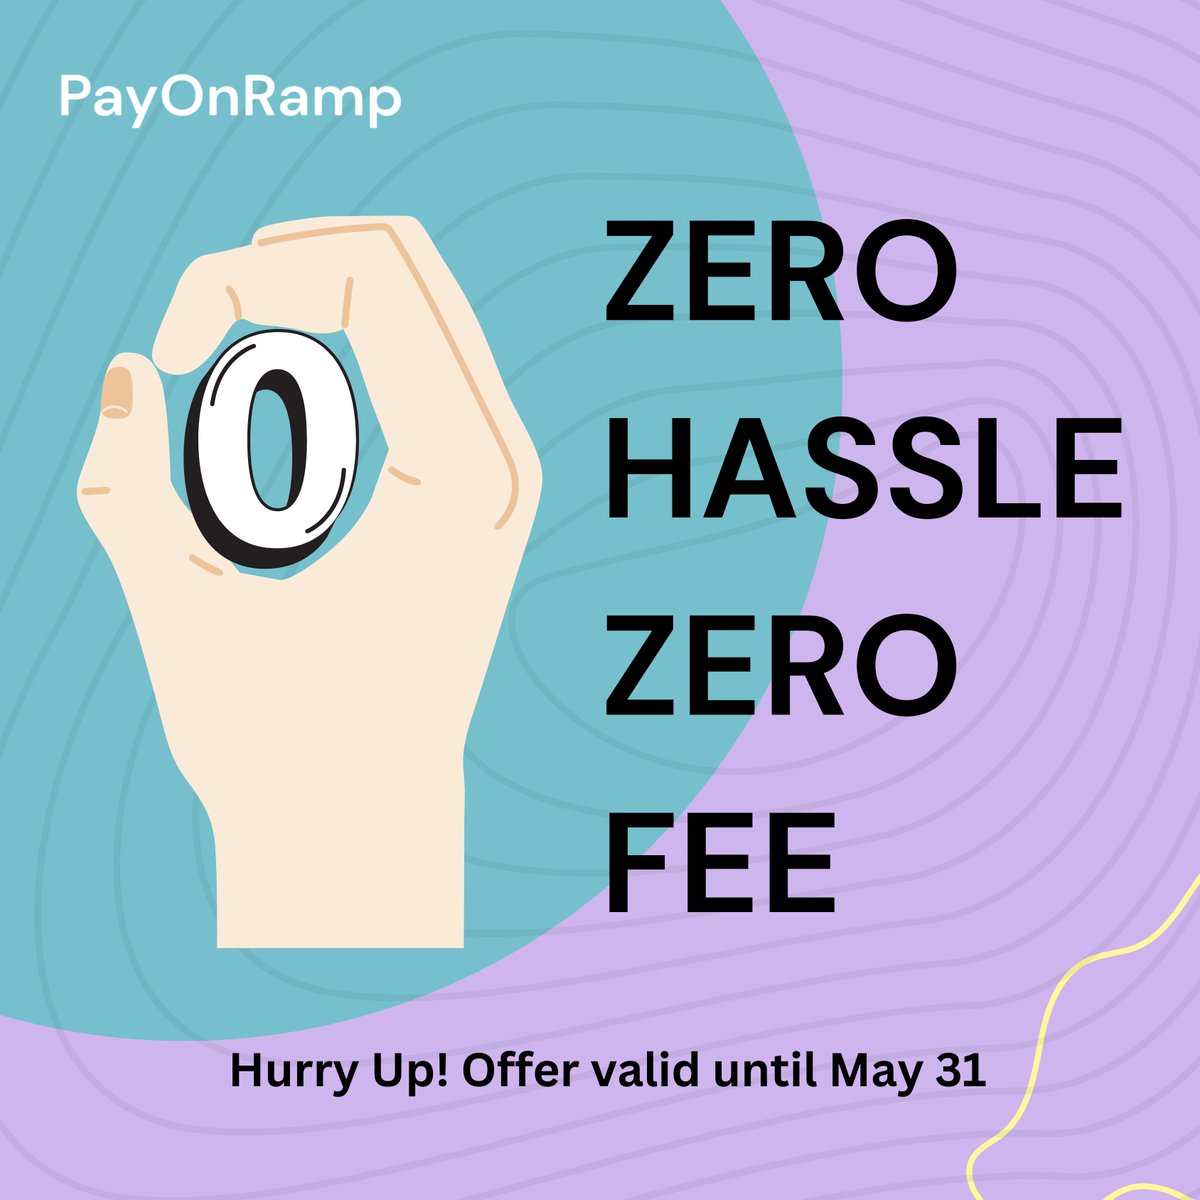 Get the best of both worlds with PayOnRamp! Zero hassle, zero fee transactions on buying and selling $USDT.

Don't wait—offer ends May 31!

Visit Now: payonramp.com

#payonramp #usdt #usdtprice #cryptopayments #cryptomarket #cryptocountdown #cryptoforce #india